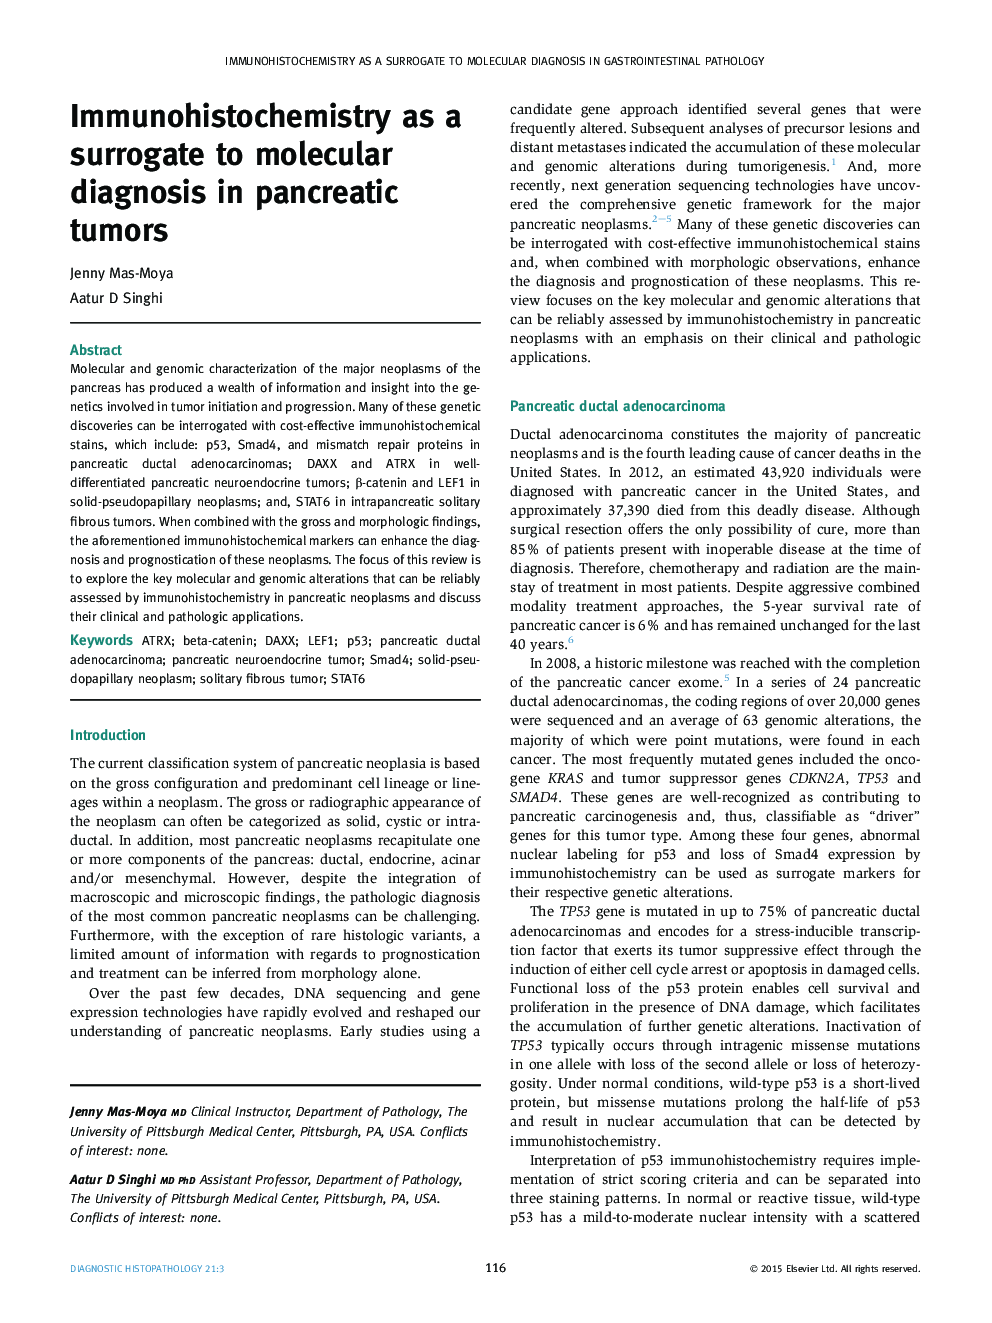 Immunohistochemistry as a surrogate to molecular diagnosis in pancreatic tumors